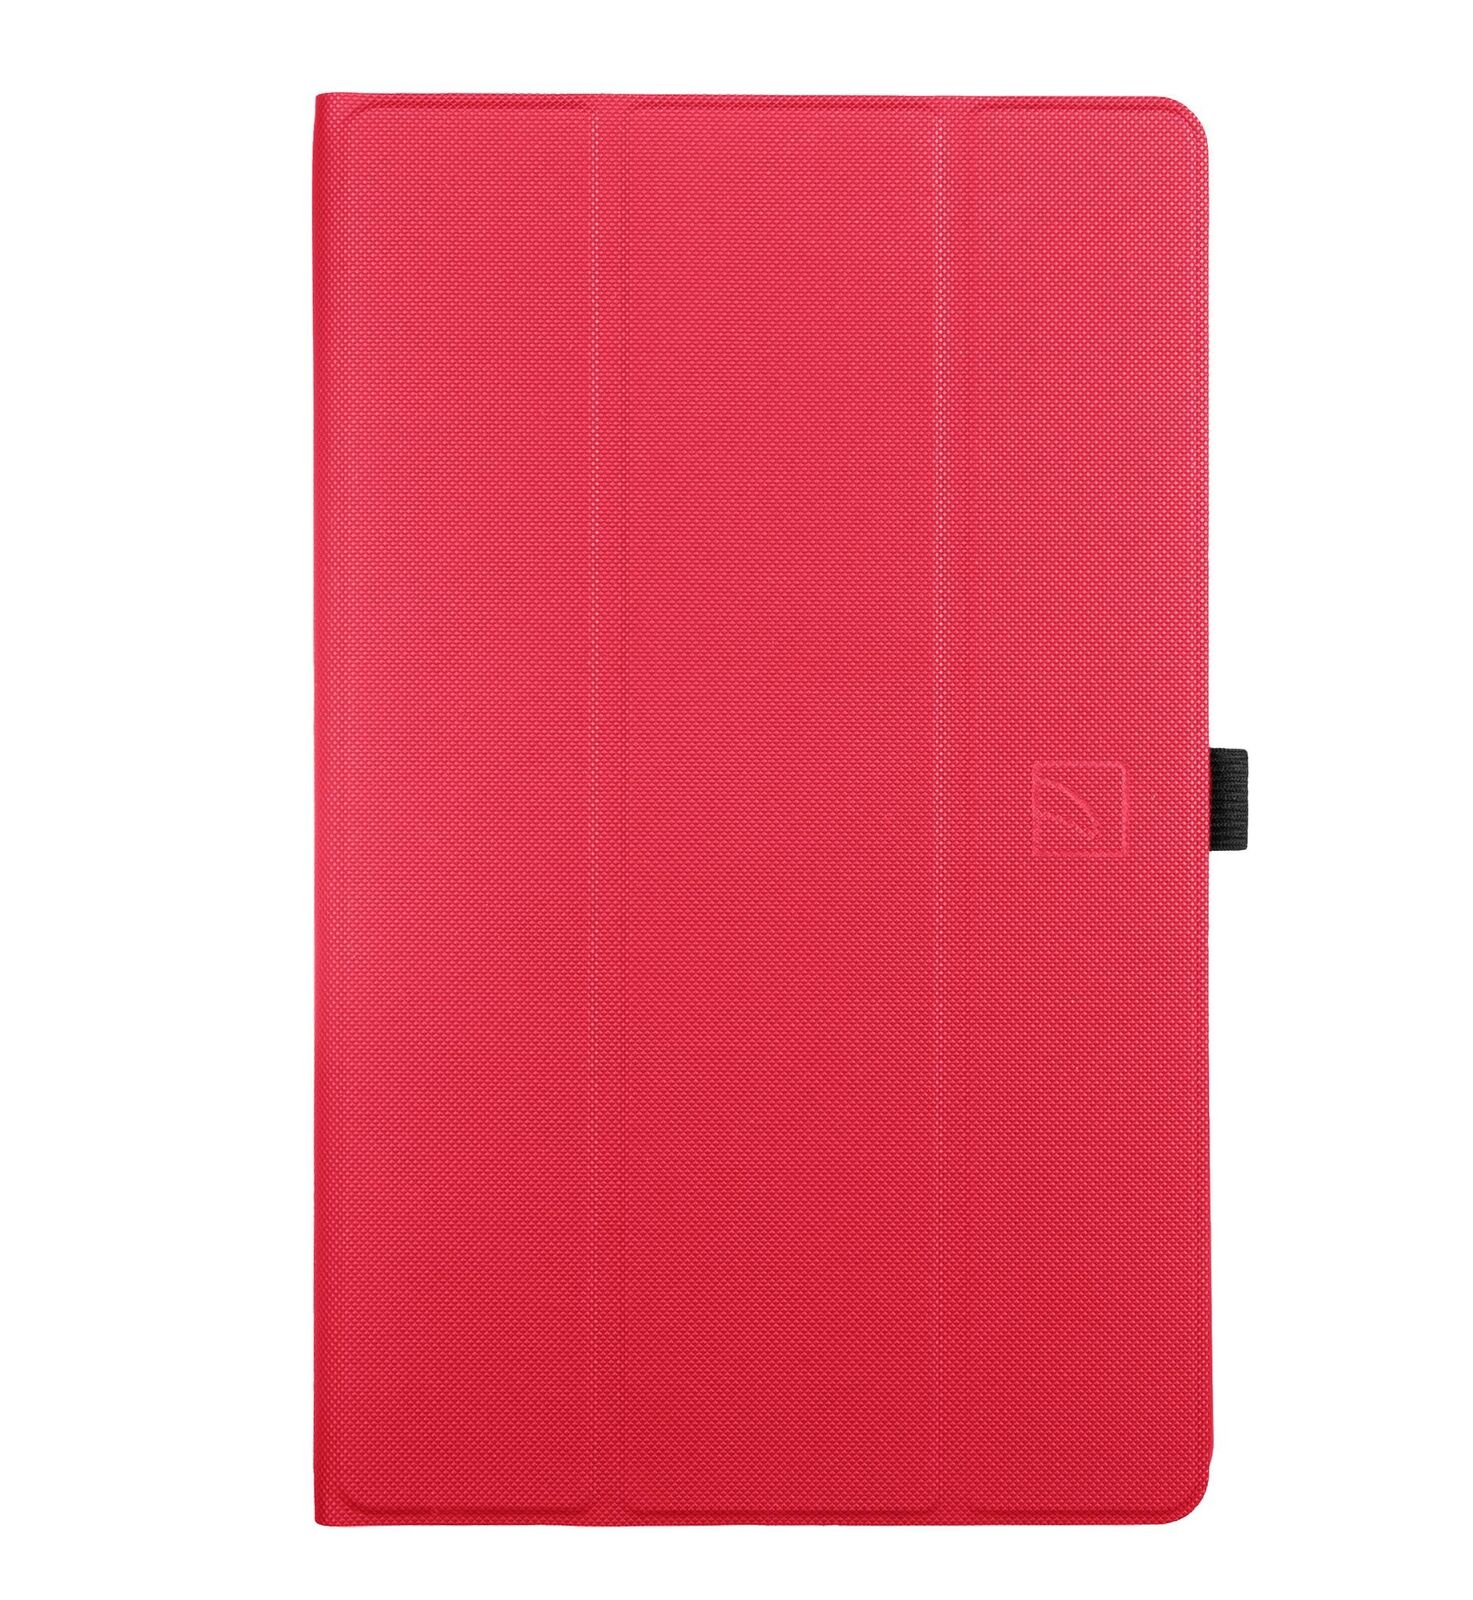 Tucano Gala Cover for Samsung Tab A 10.1 2019 T510 in Red